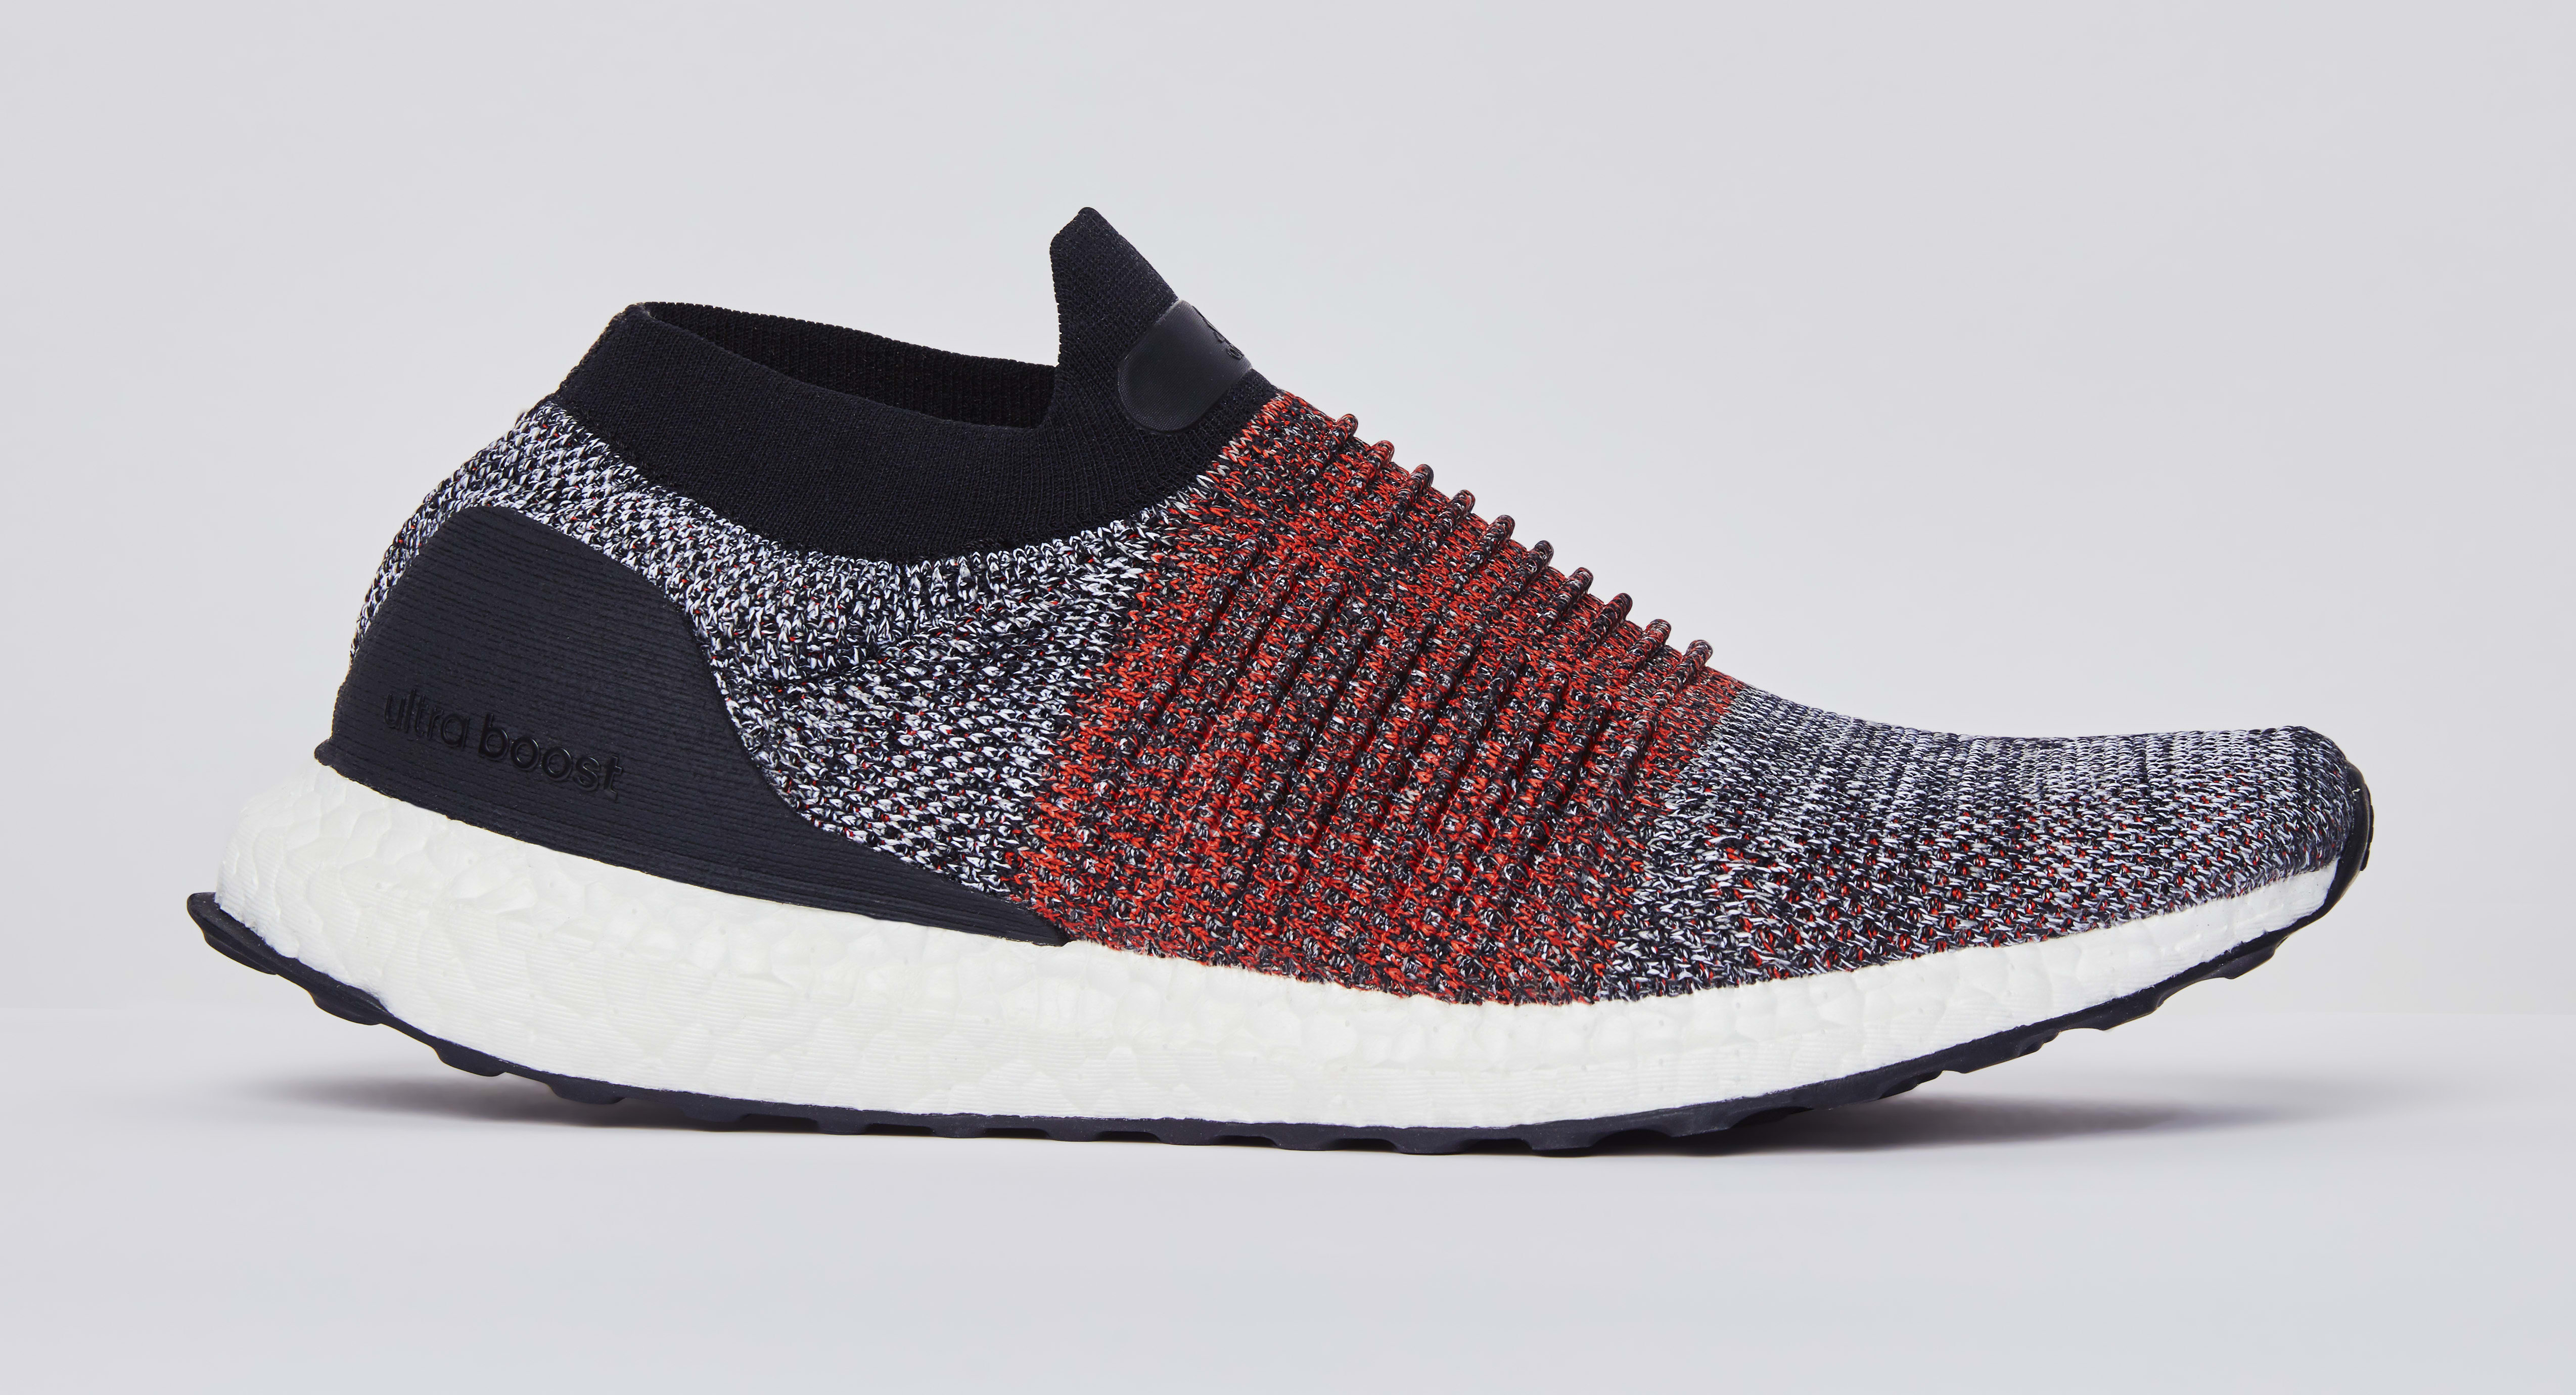 Adidas UltraBOOST Laceless Black/Red (Lateral)